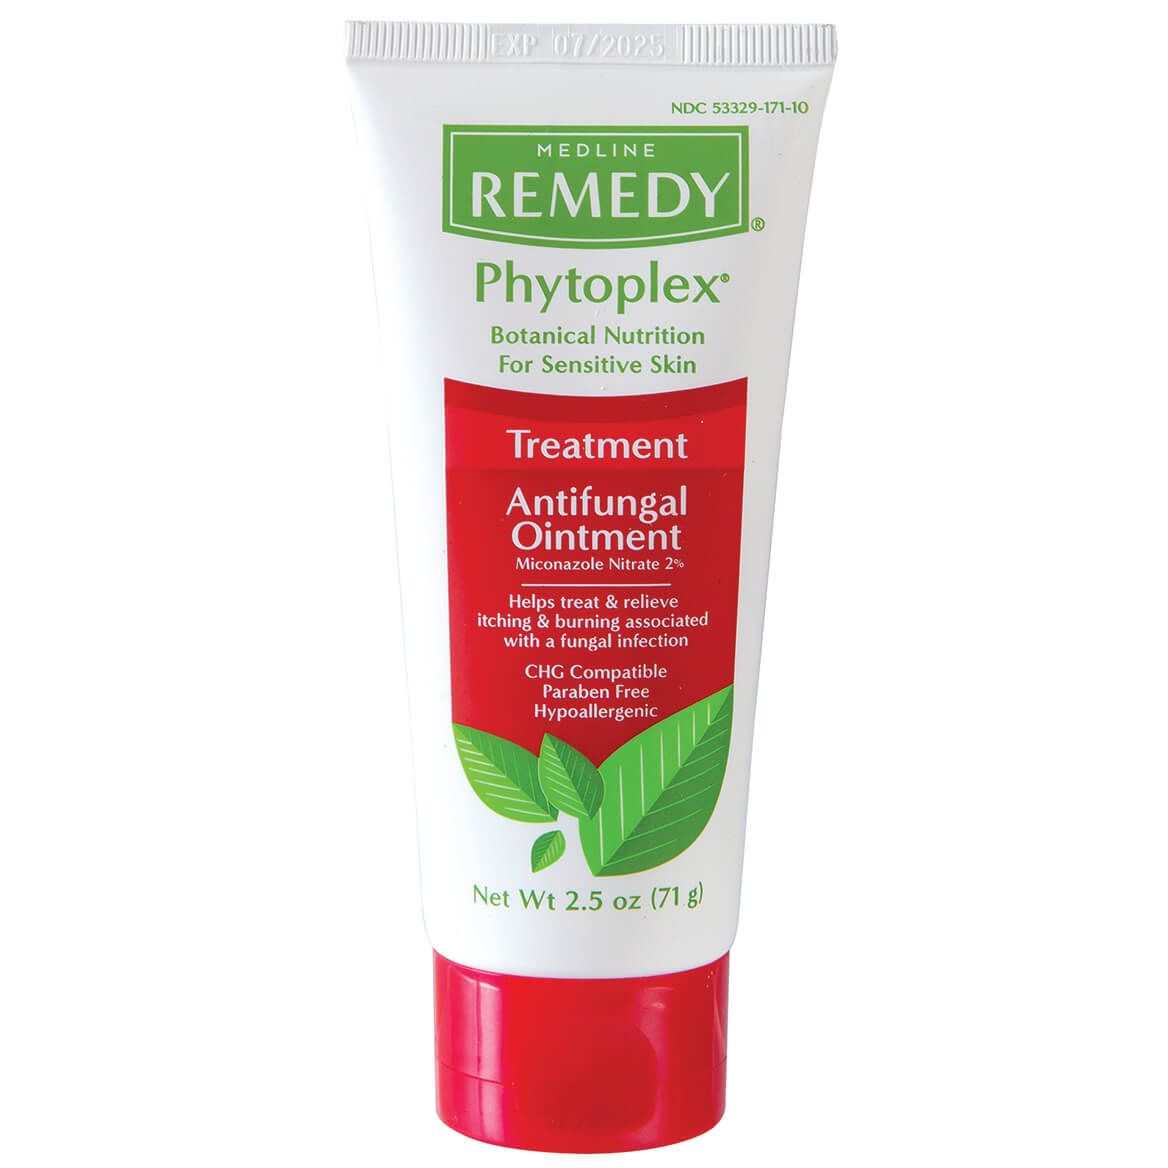 Remedy® Clinical Antifungal Ointment, 2.5 oz. + '-' + 377372